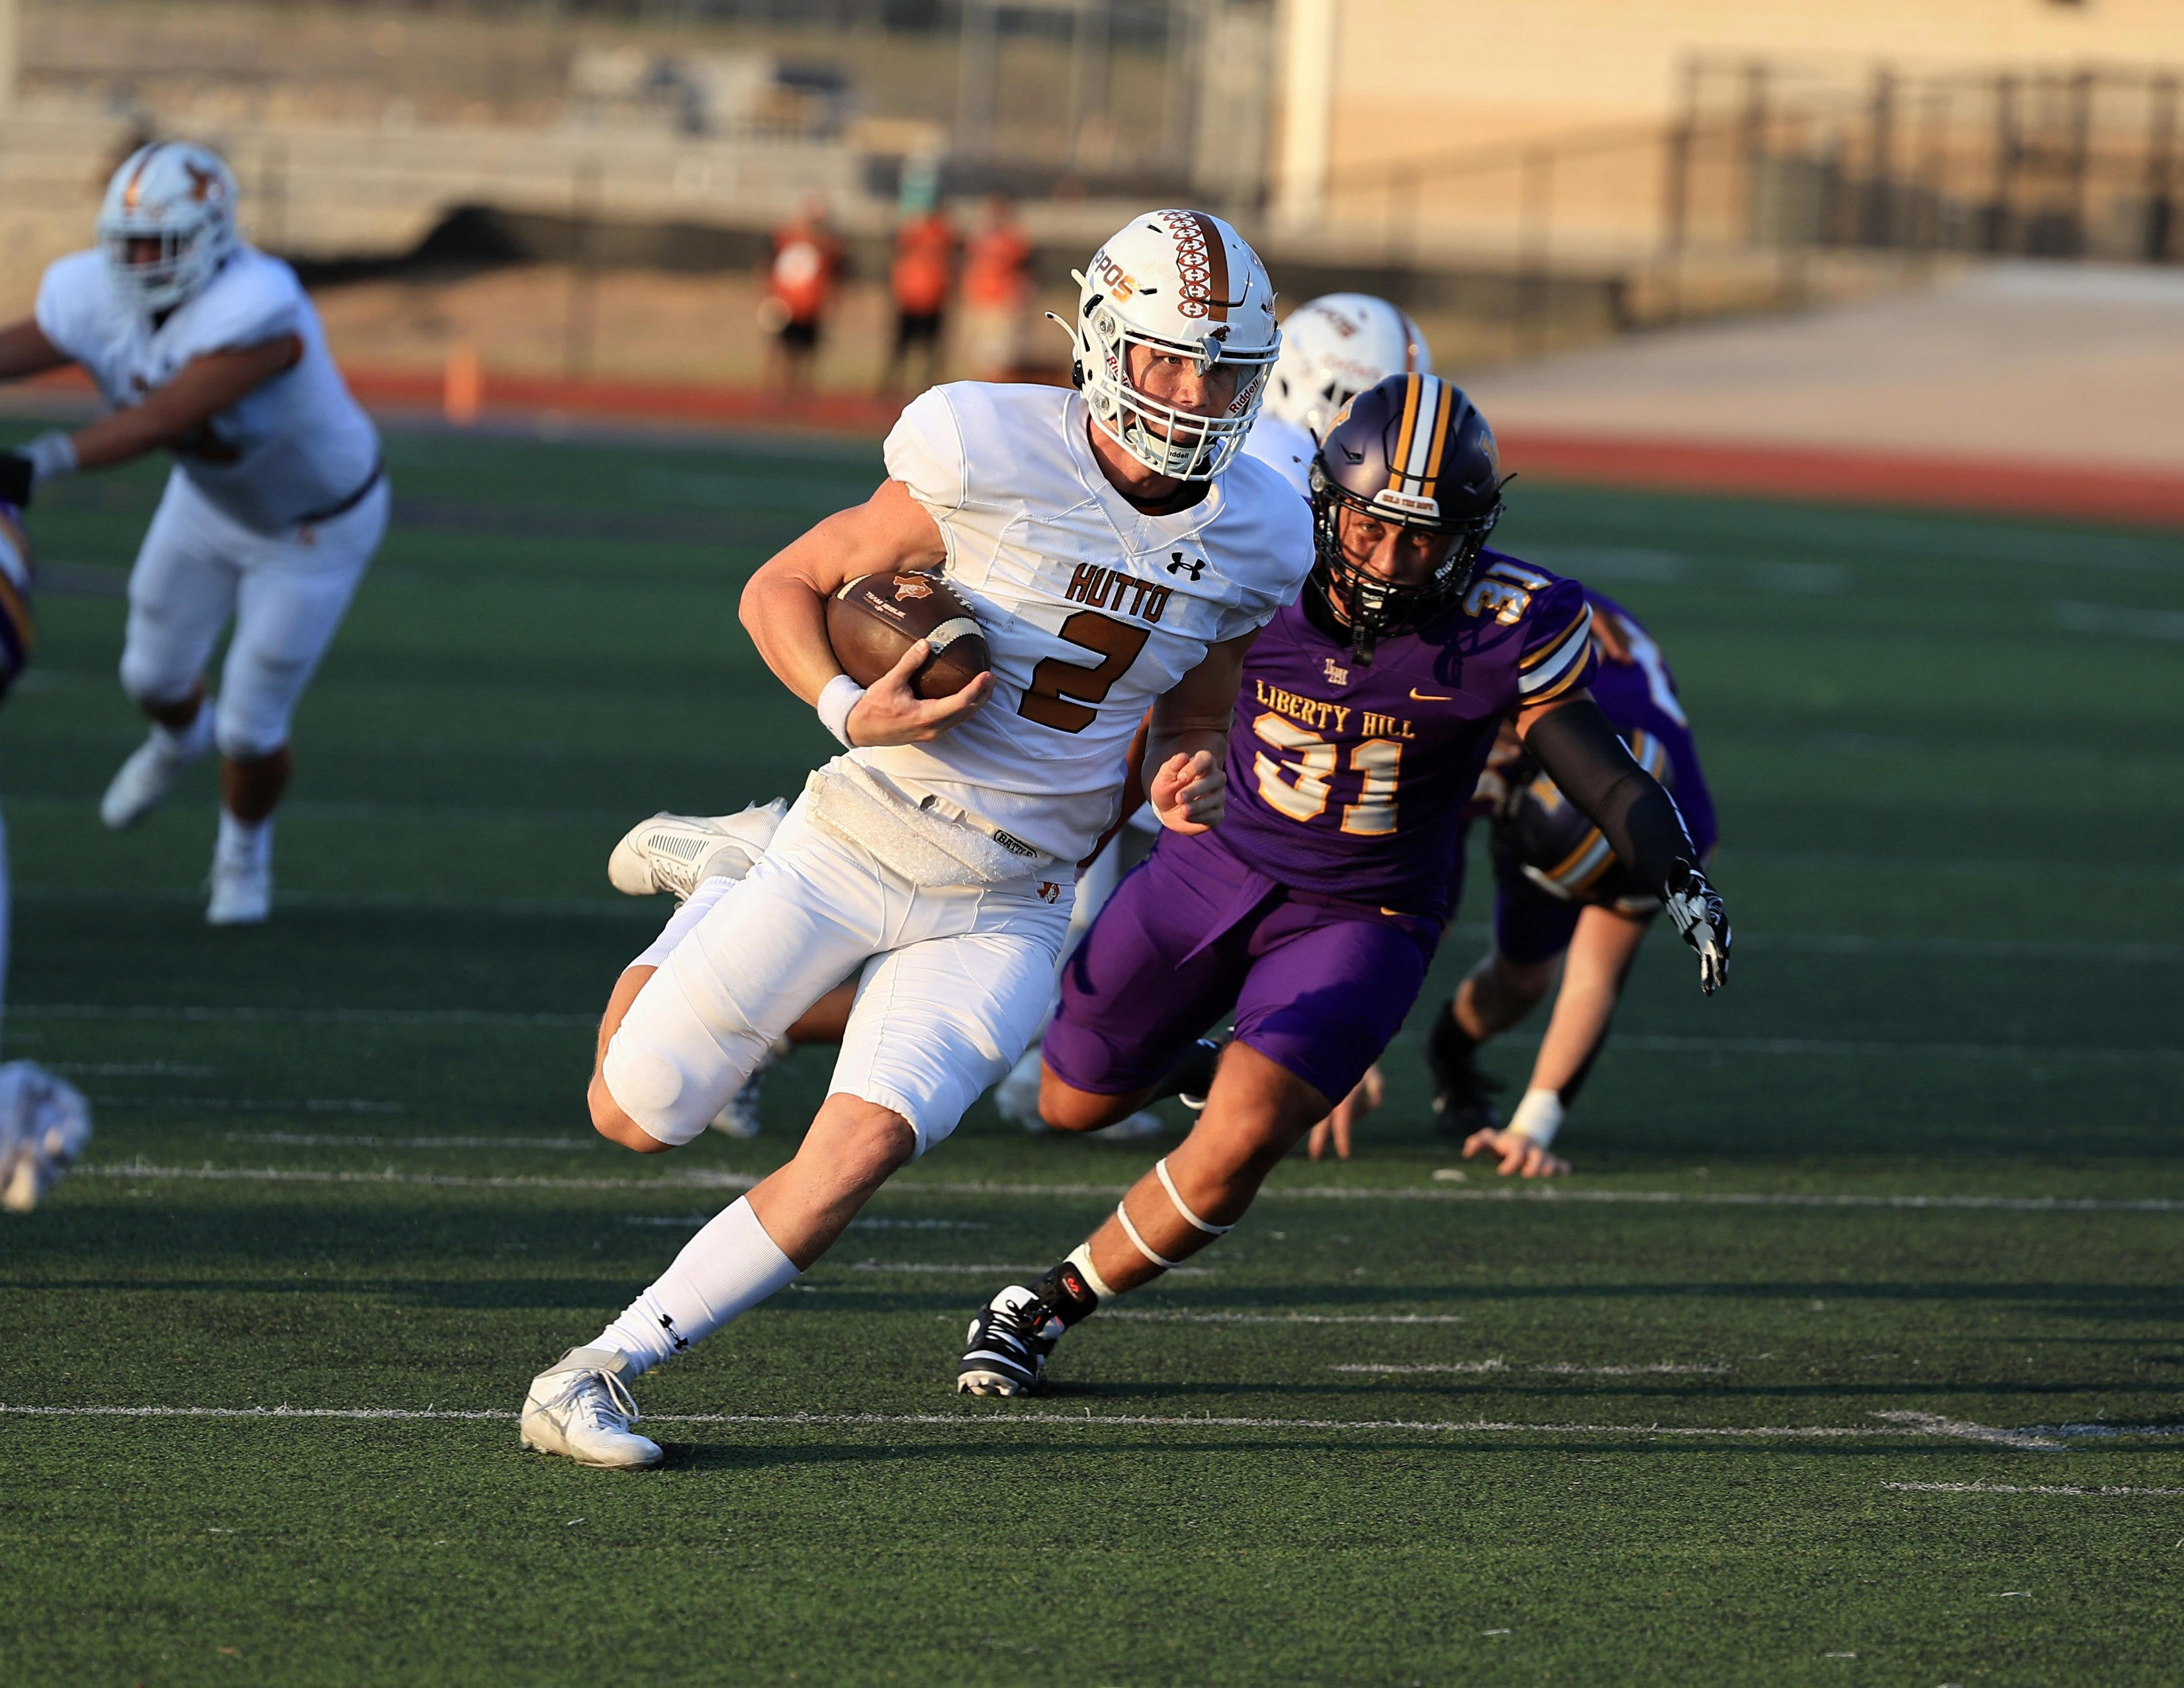 Historic night Hutto's Will Hammond passes for 719 yards in shootout